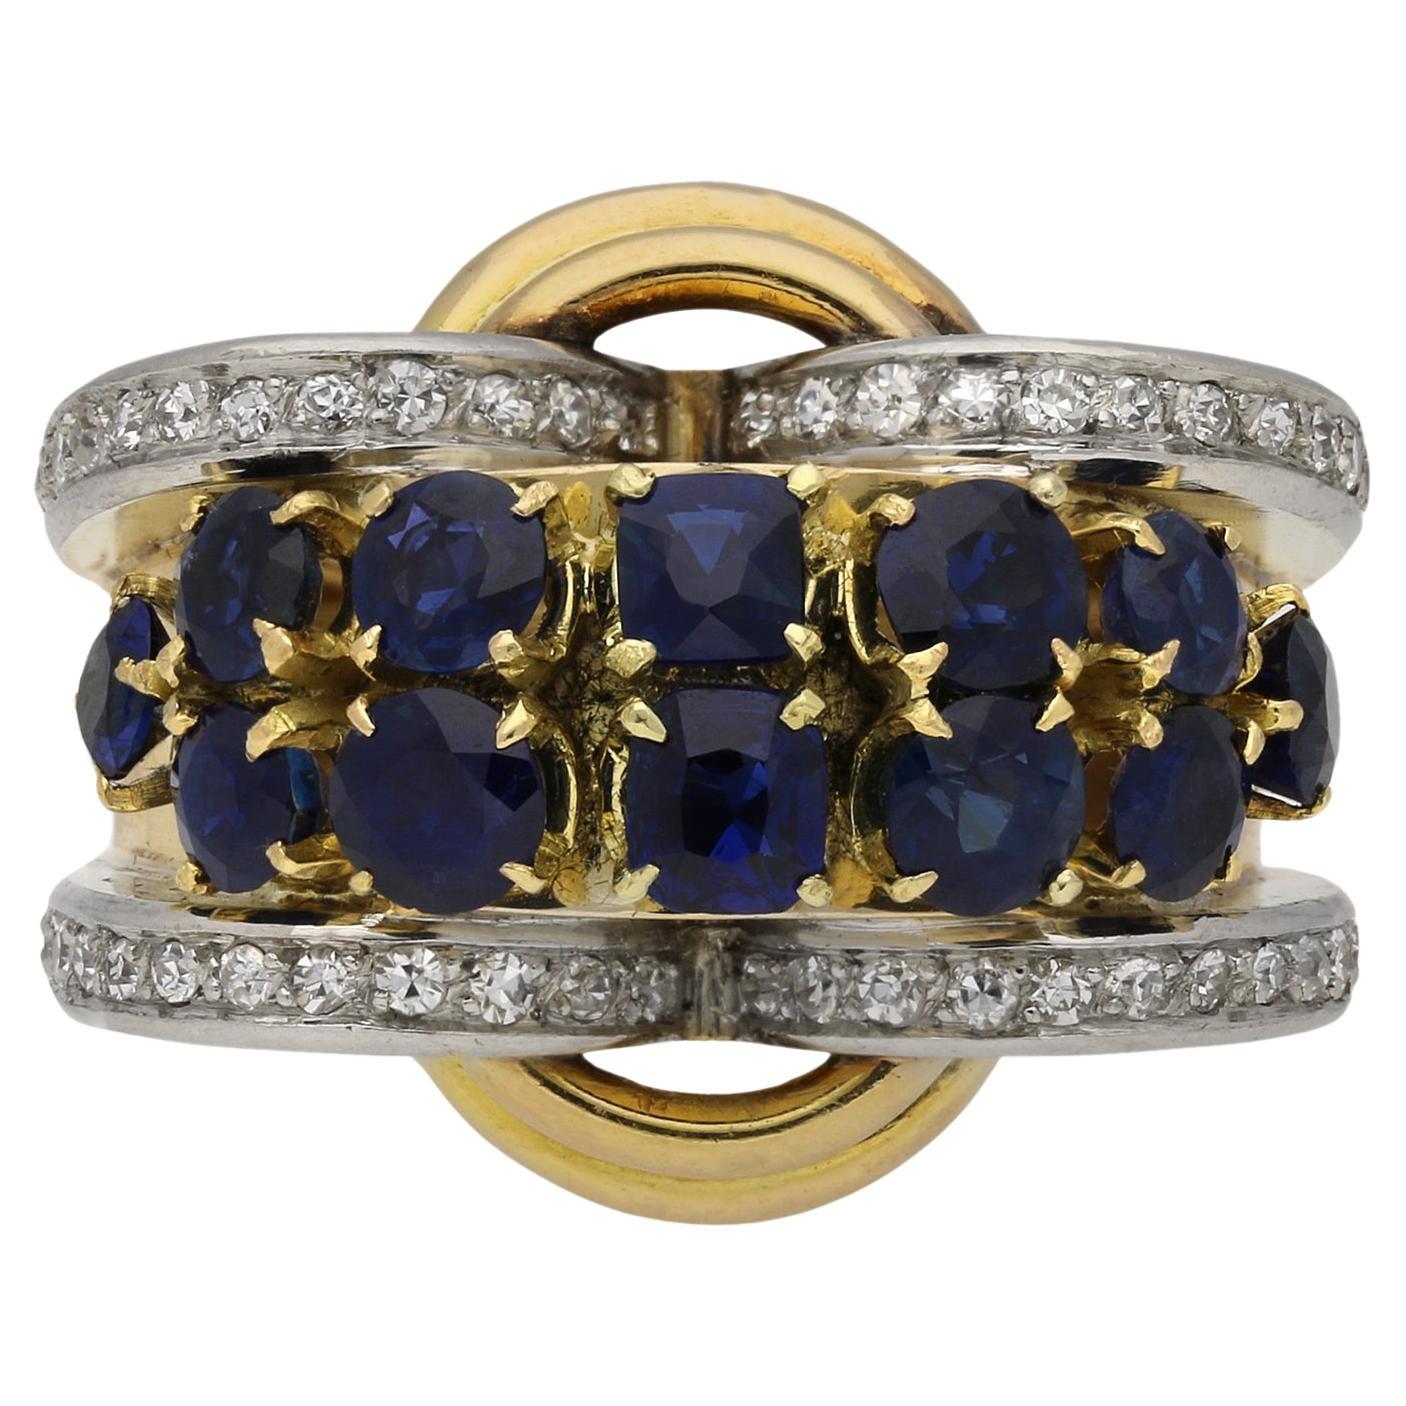 Sapphire and diamond cocktail ring, French, circa 1945.